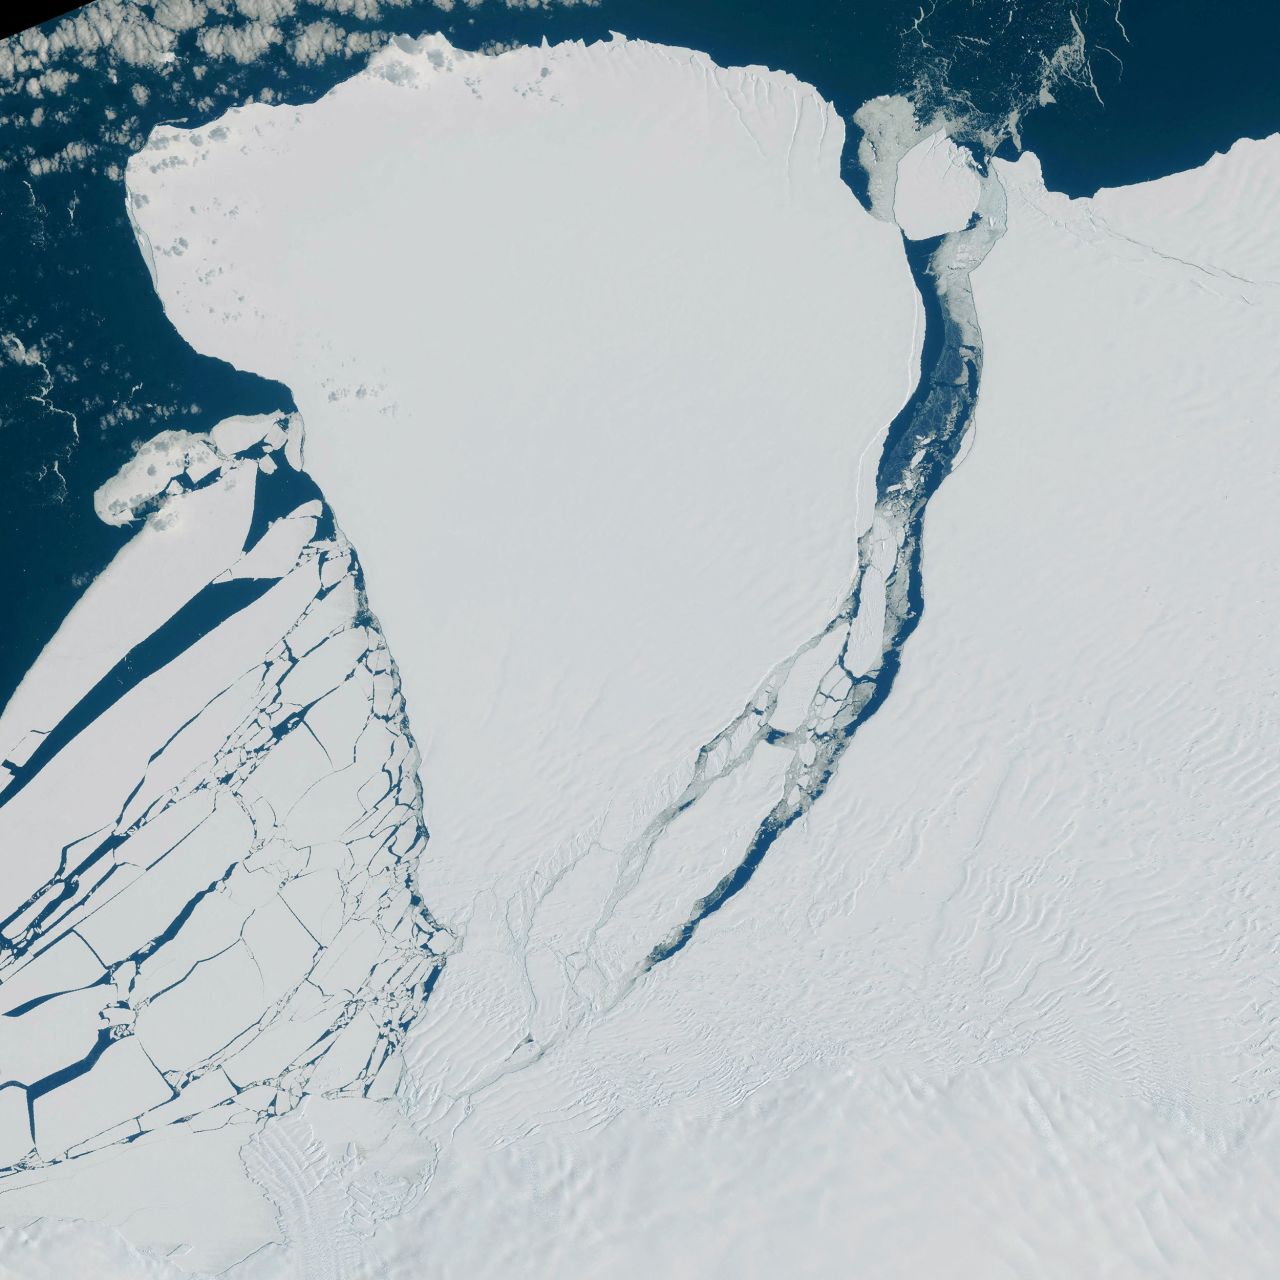 This aerial photo shows an iceberg, nearly the size of Greater London, <a href="https://www.cnn.com/2023/01/25/world/antarctica-brunt-iceberg-climate/index.html" target="_blank">breaking off the Brunt Ice Shelf in Antarctica</a> on Sunday, January 22. Researchers said this event was expected and not a result of climate change.